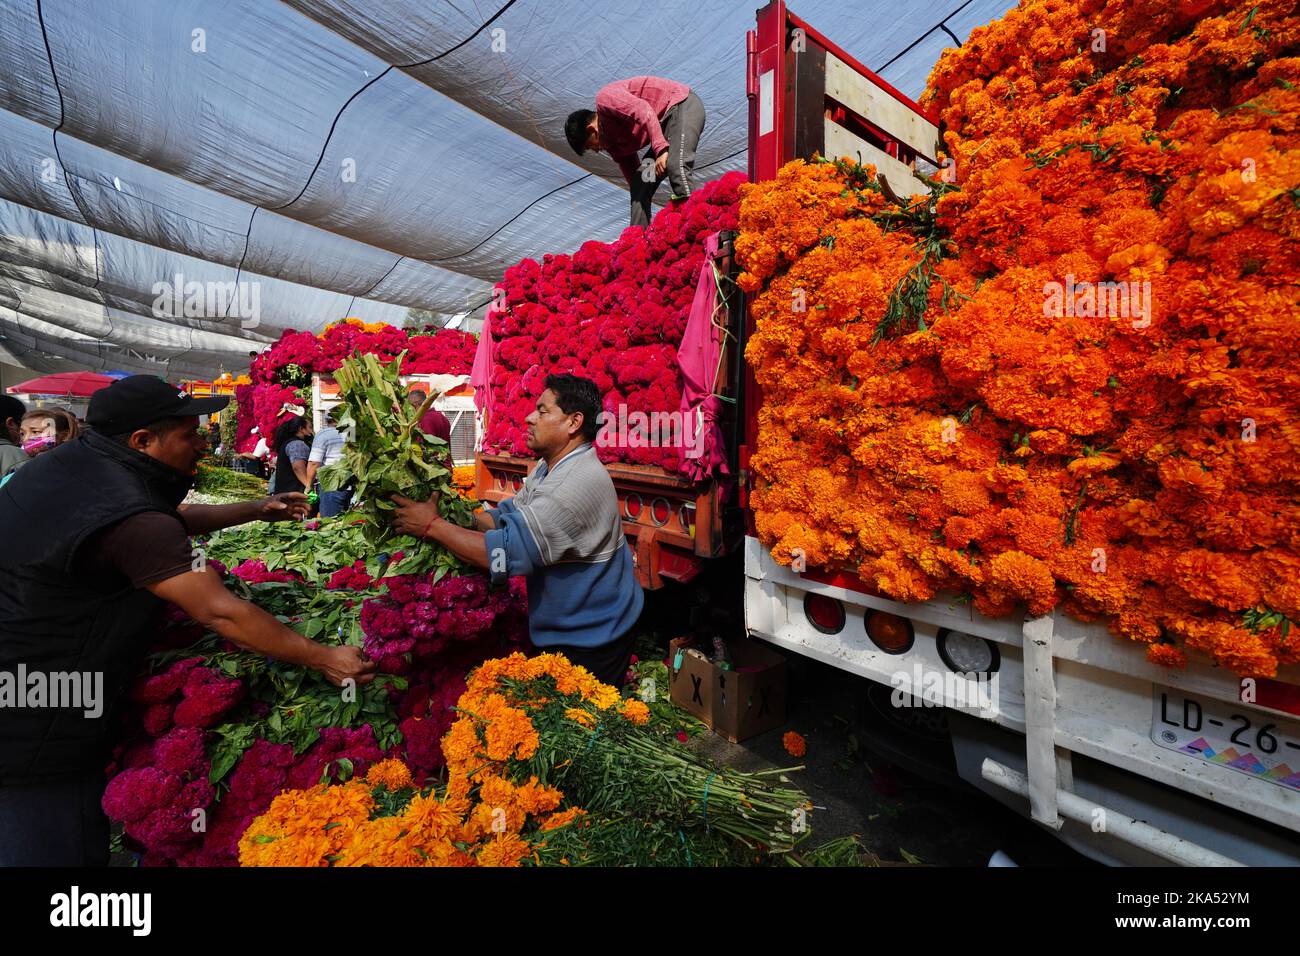 Mexico City, Mexico. 31st Oct, 2022. Flower sellers do brisk business selling red cockscomb and cempasuchil, the traditional flowers of the Day of the Dead flower used to decorate altars and gravesites during the annual festival at the Jamaica Flower Market, October 31, 2022 in Mexico City, Mexico. Credit: Richard Ellis/Richard Ellis/Alamy Live News Stock Photo